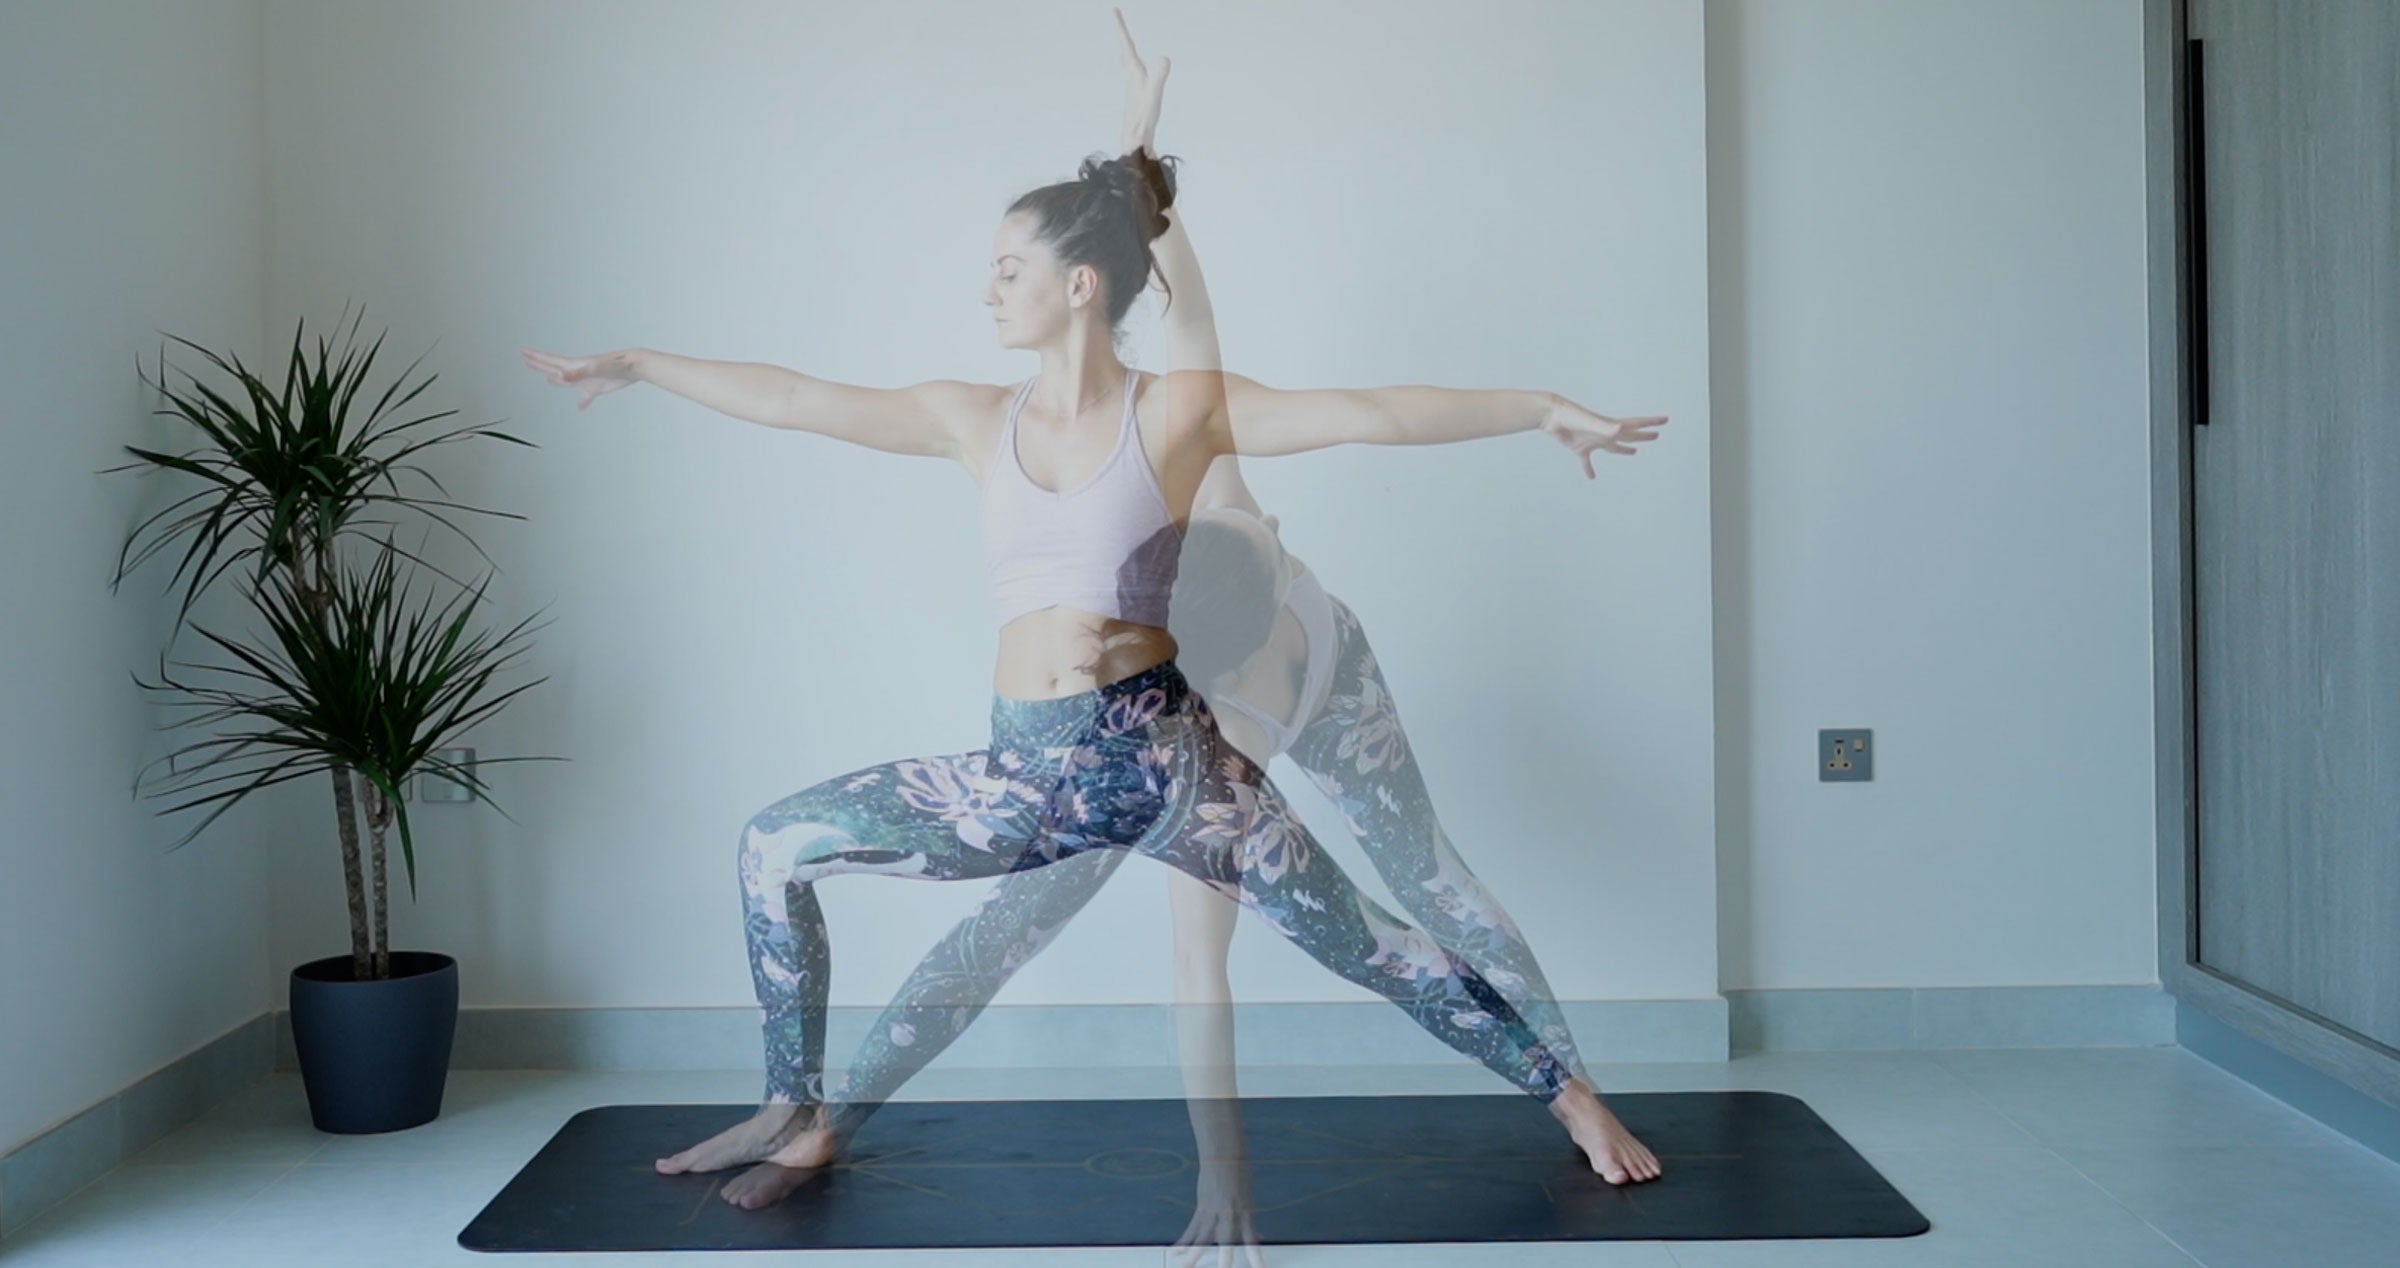 Yoga's 5 Warrior Poses: Benefits & Tips For Perfect Form